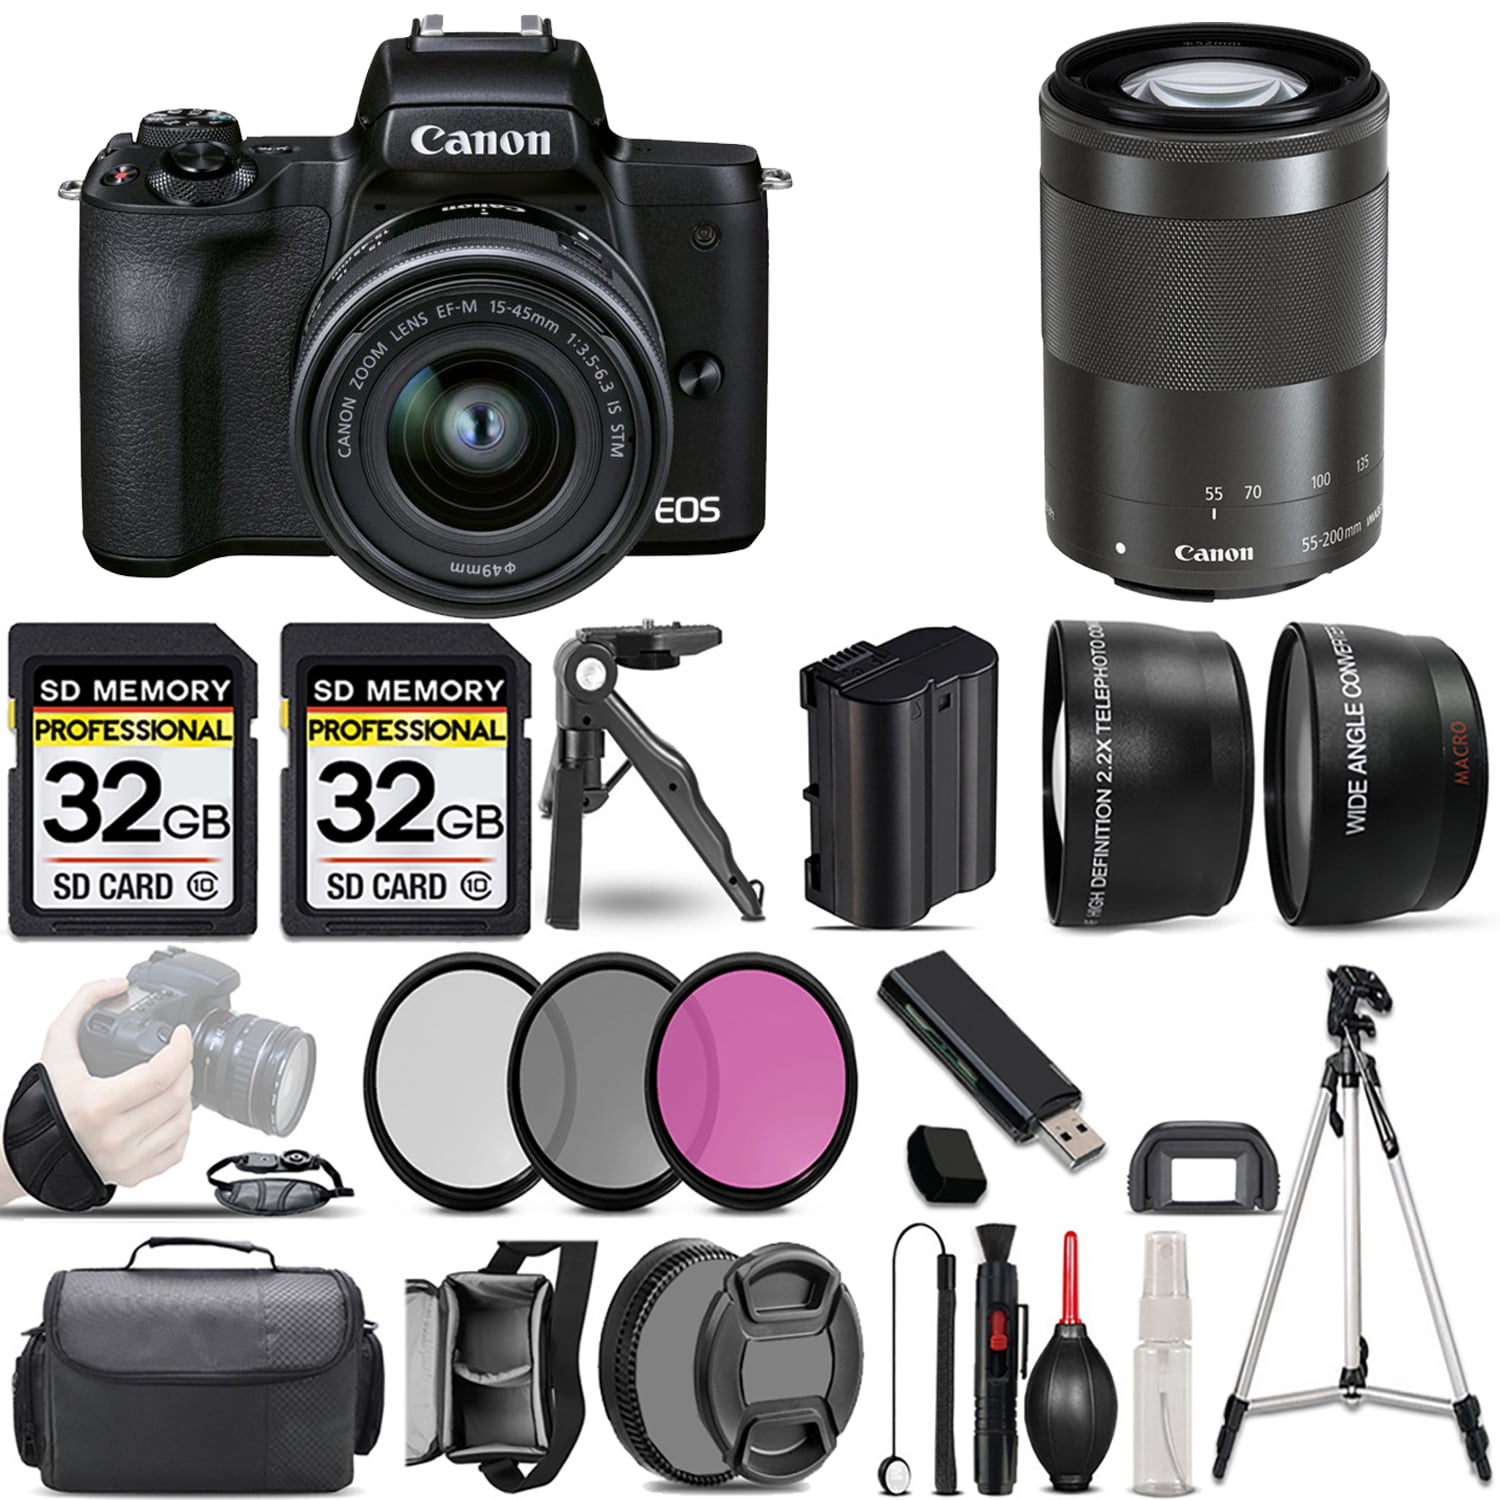 Canon EOS M50 Mark II Mirrorless Camera with 15-45mm Lens (Black) +55-200mm  f/4.5-6.3 IS STM Lens (Black) +3 PC Filter +64GB 